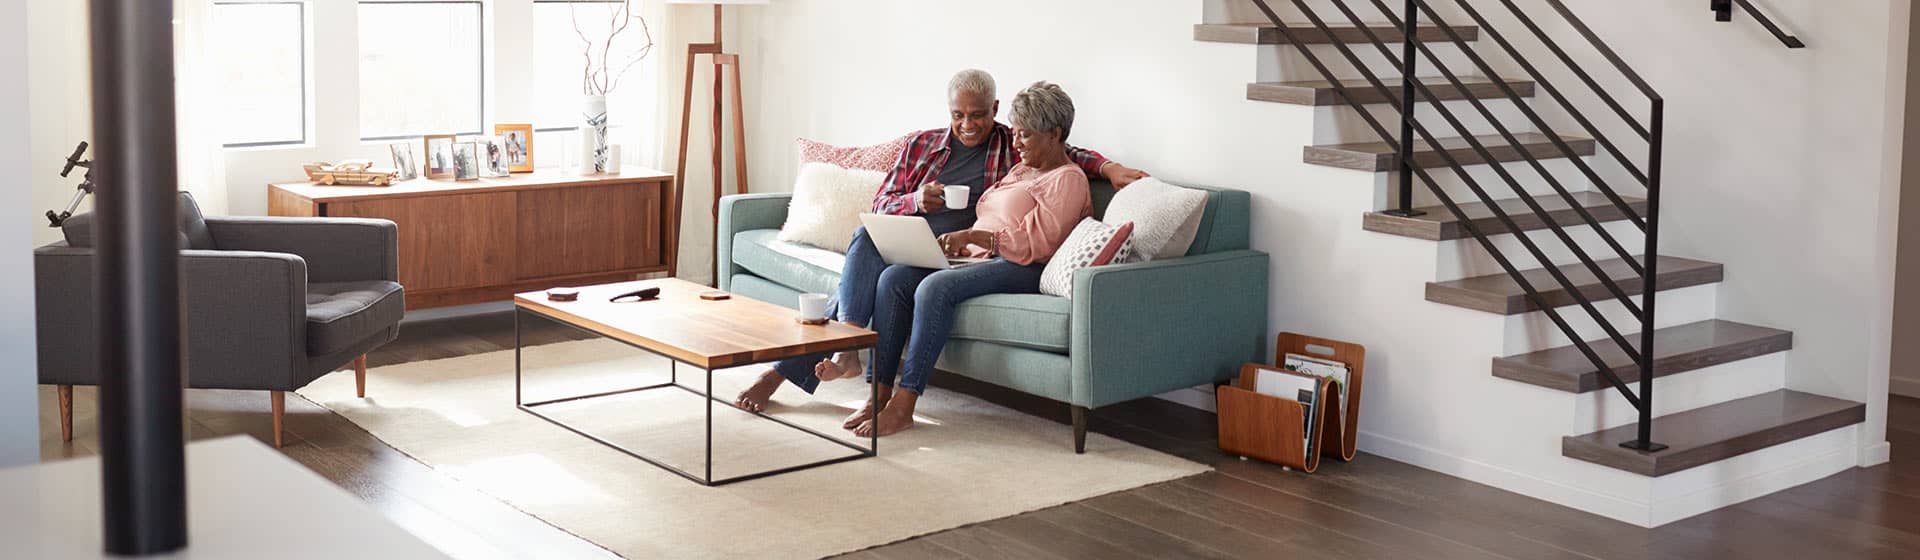 Elderly Couple on the couch using their laptop to check retirement savings numbers